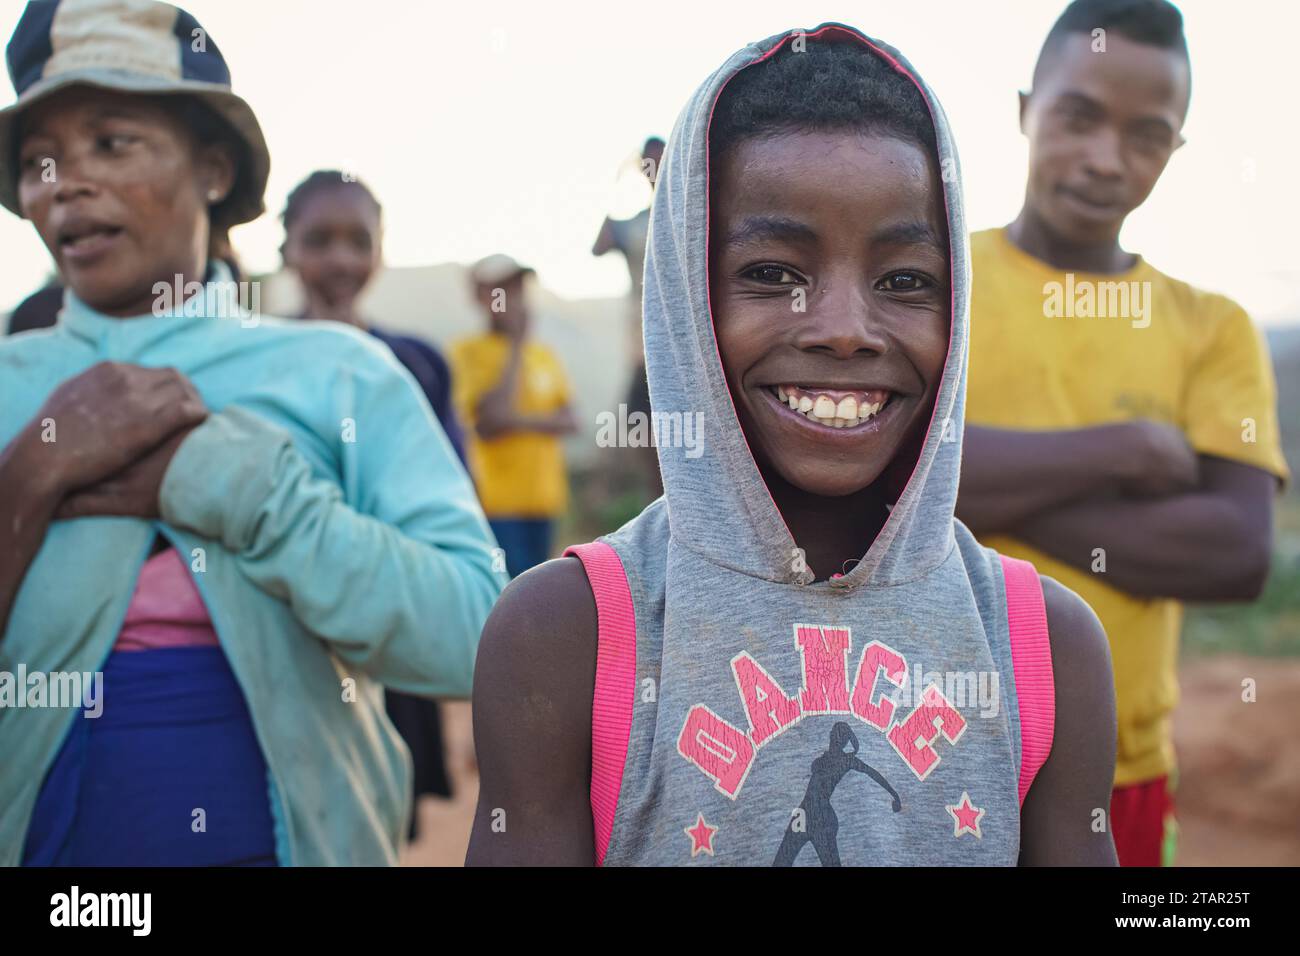 Alakamisy Ambohimaha, Madagascar - April 26, 2019: Unknown young Malagasy boy posing for camera - people of Madagascar are poor but cheerful, especial Stock Photo